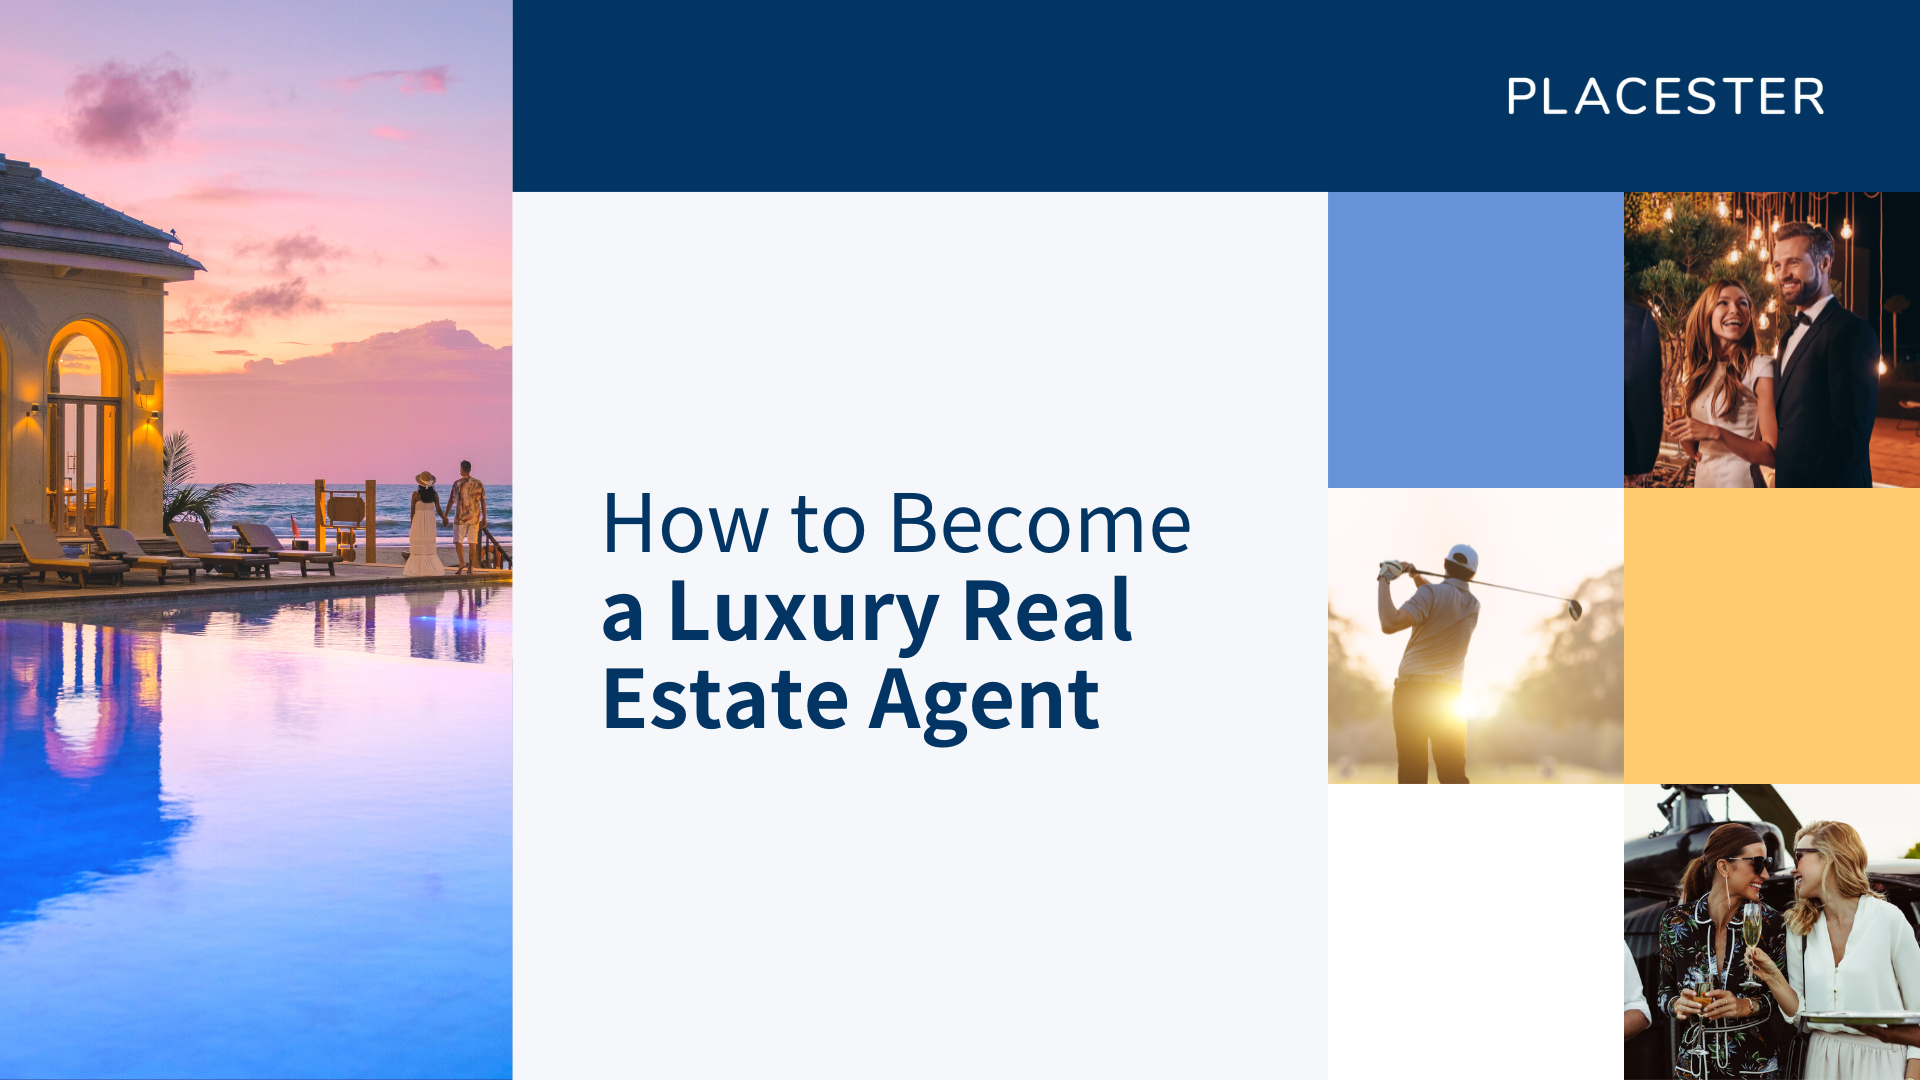 How to become a luxury real estate agent?